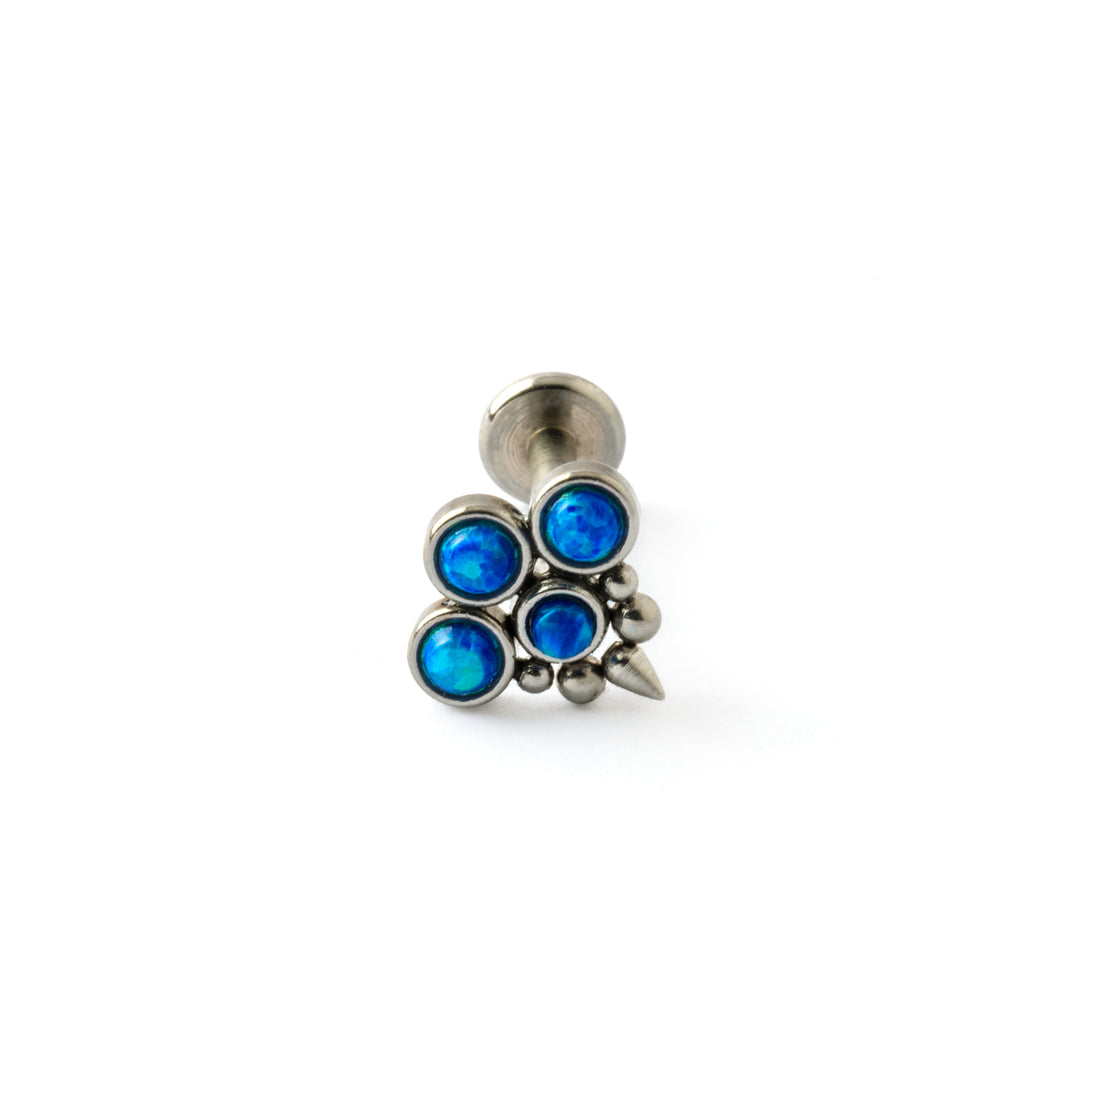 Brenna- surgical steel labret with 4 blue opals frontal view